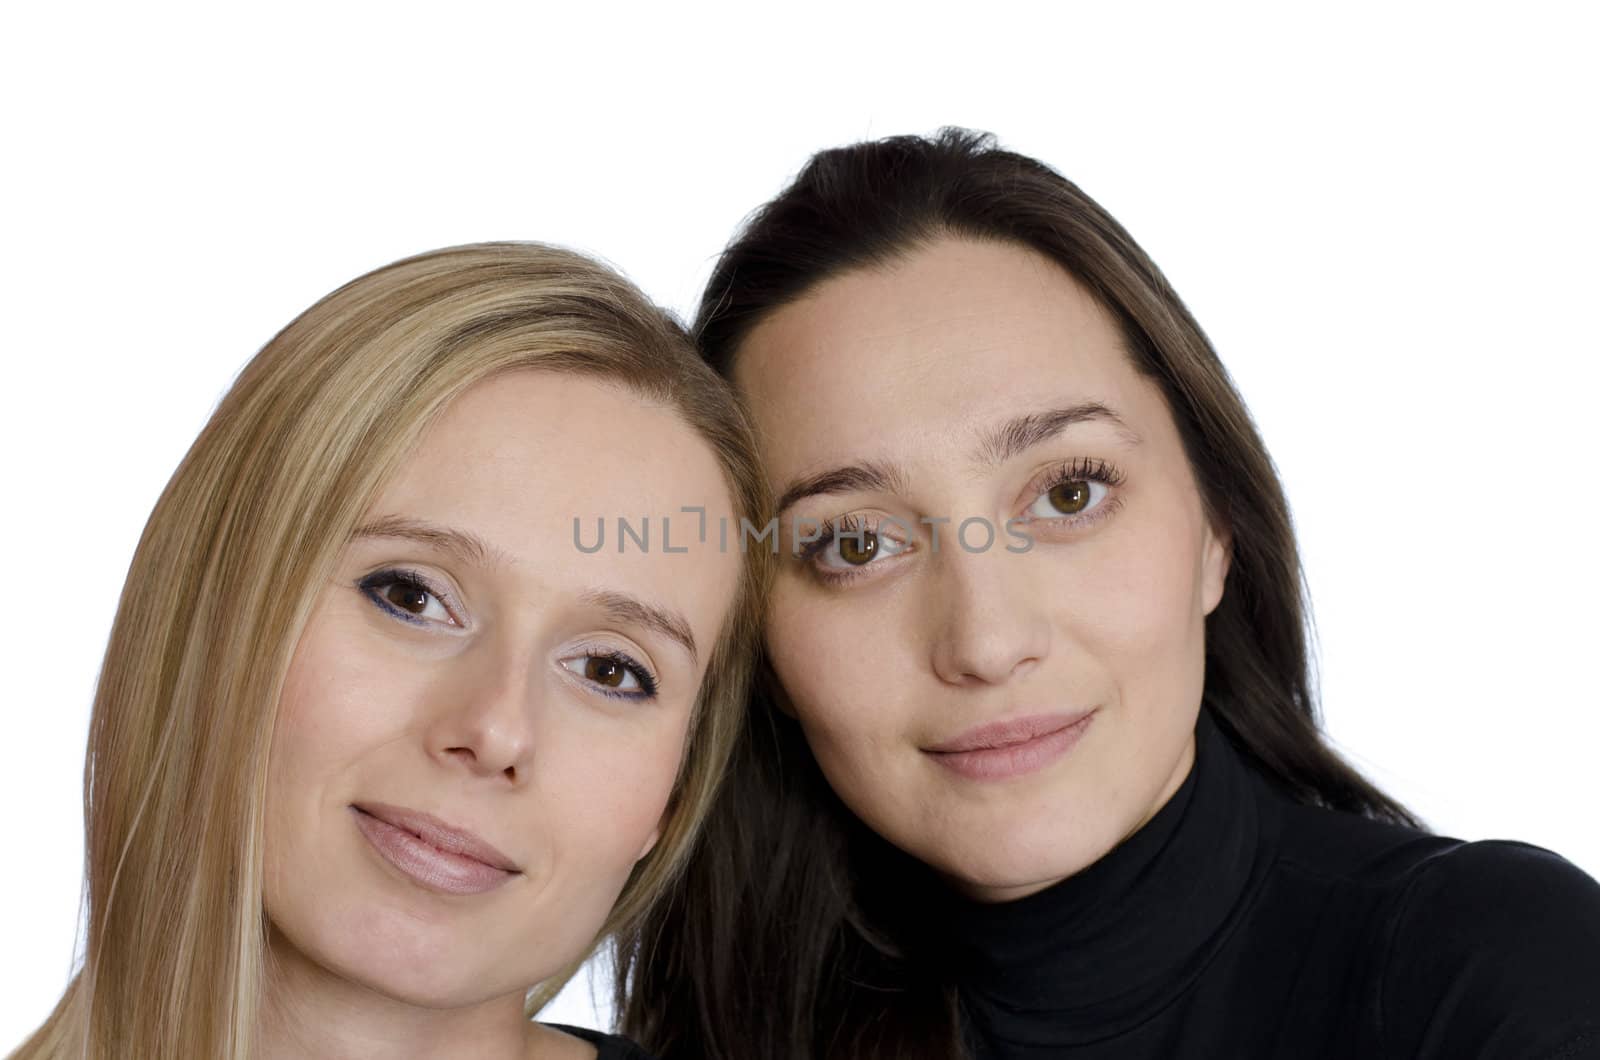 two girls one blonde and one brunette smiling on a white background